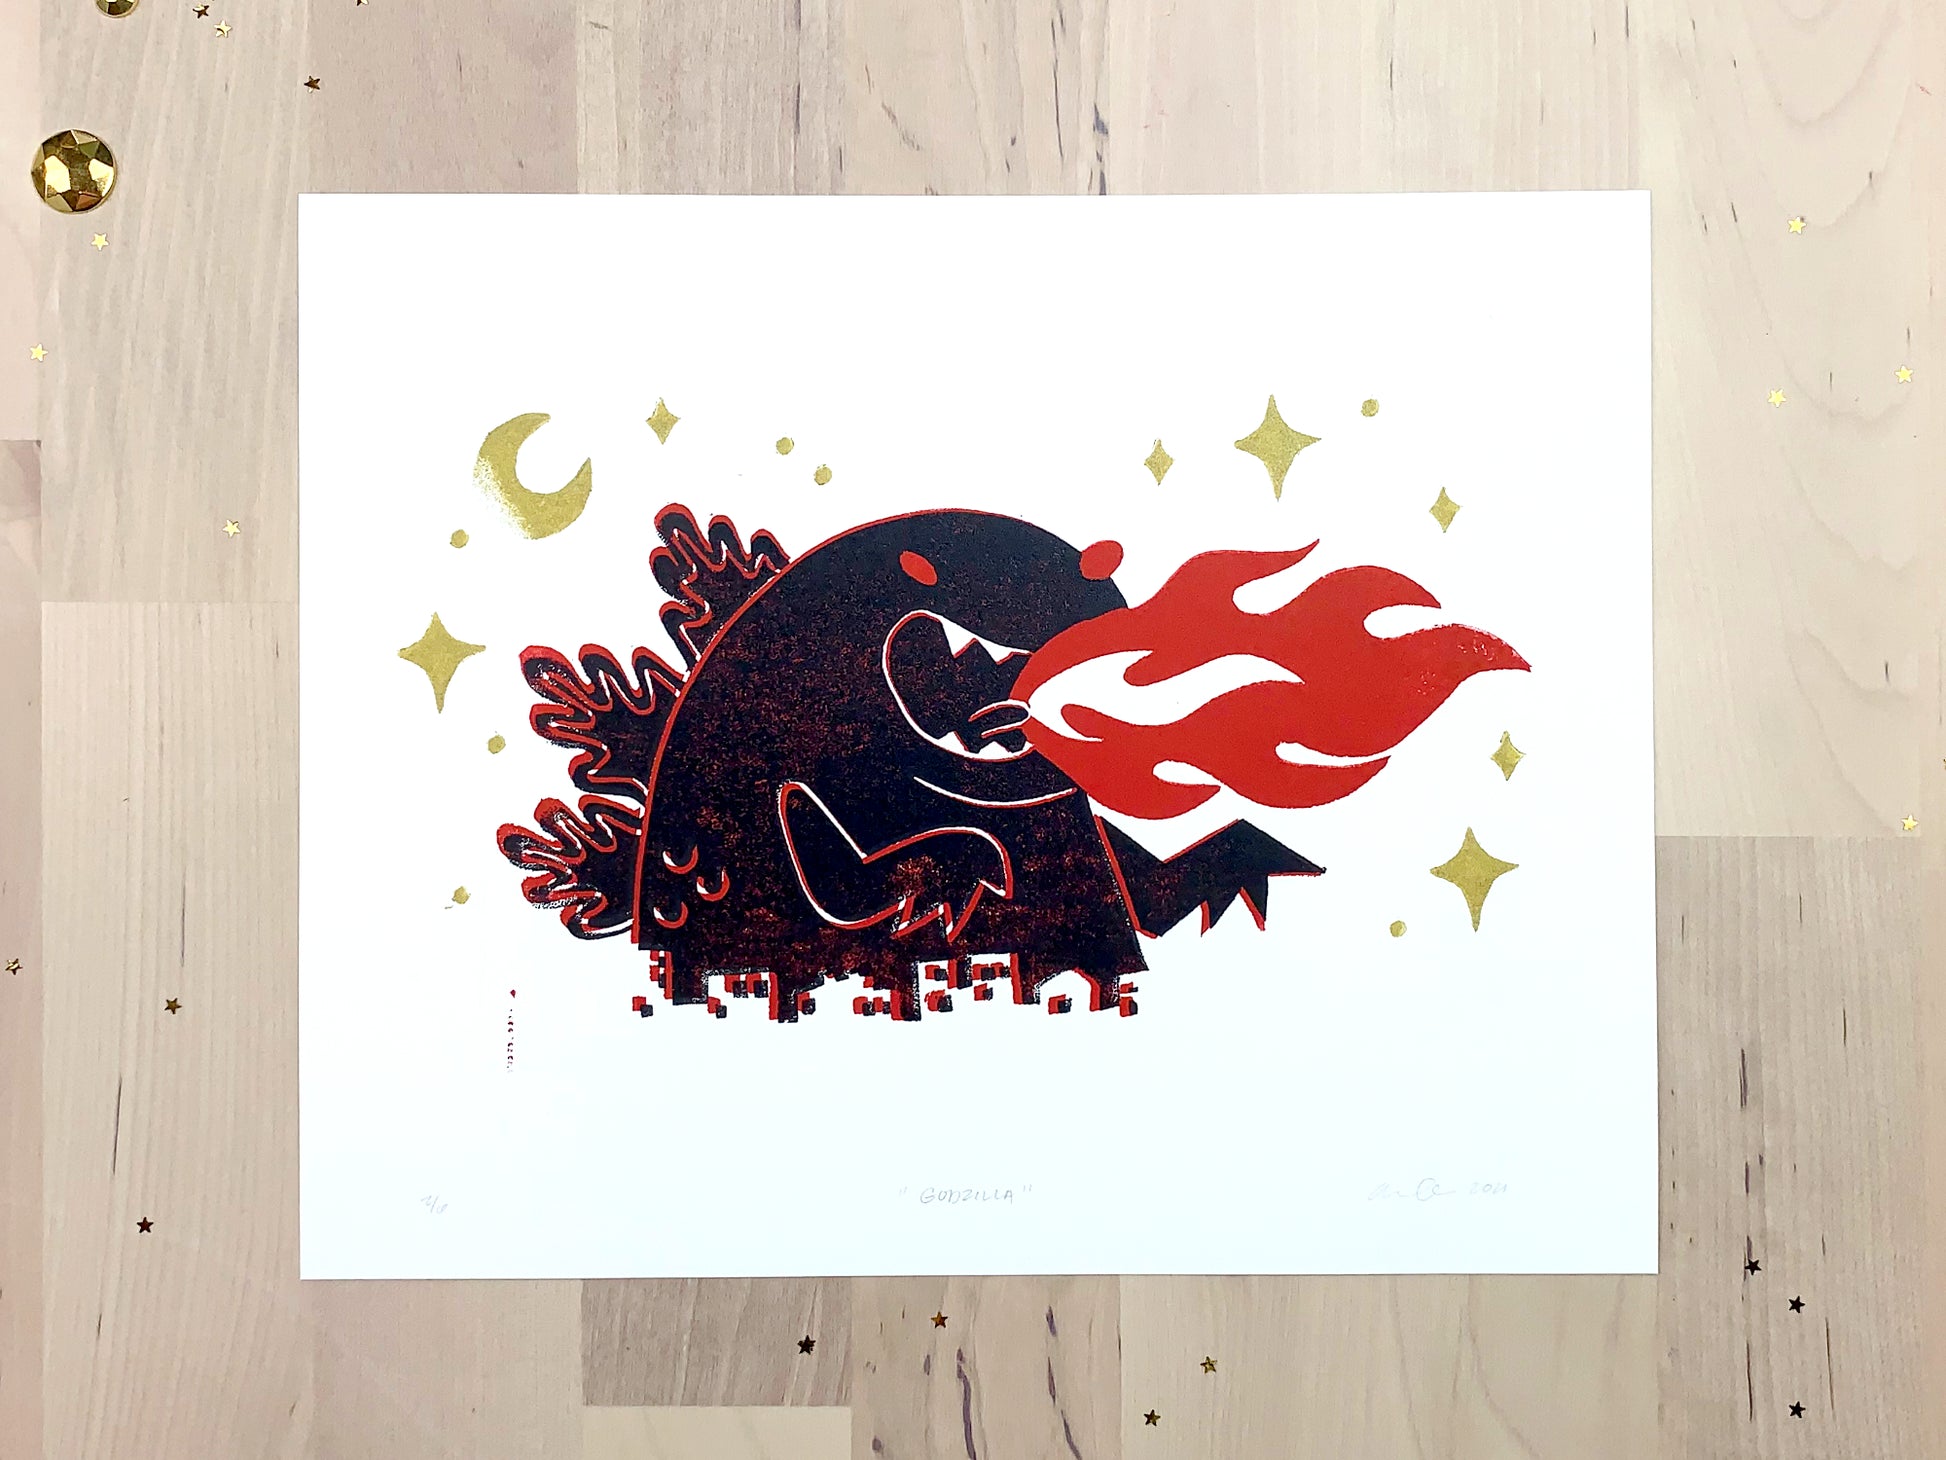 Original limited edition #2 art print by Amber Orenstein. Two color, red and black, reduction block print of a Japanese kaiju monster roaring with flames while destroying a city with gold stars and moon.